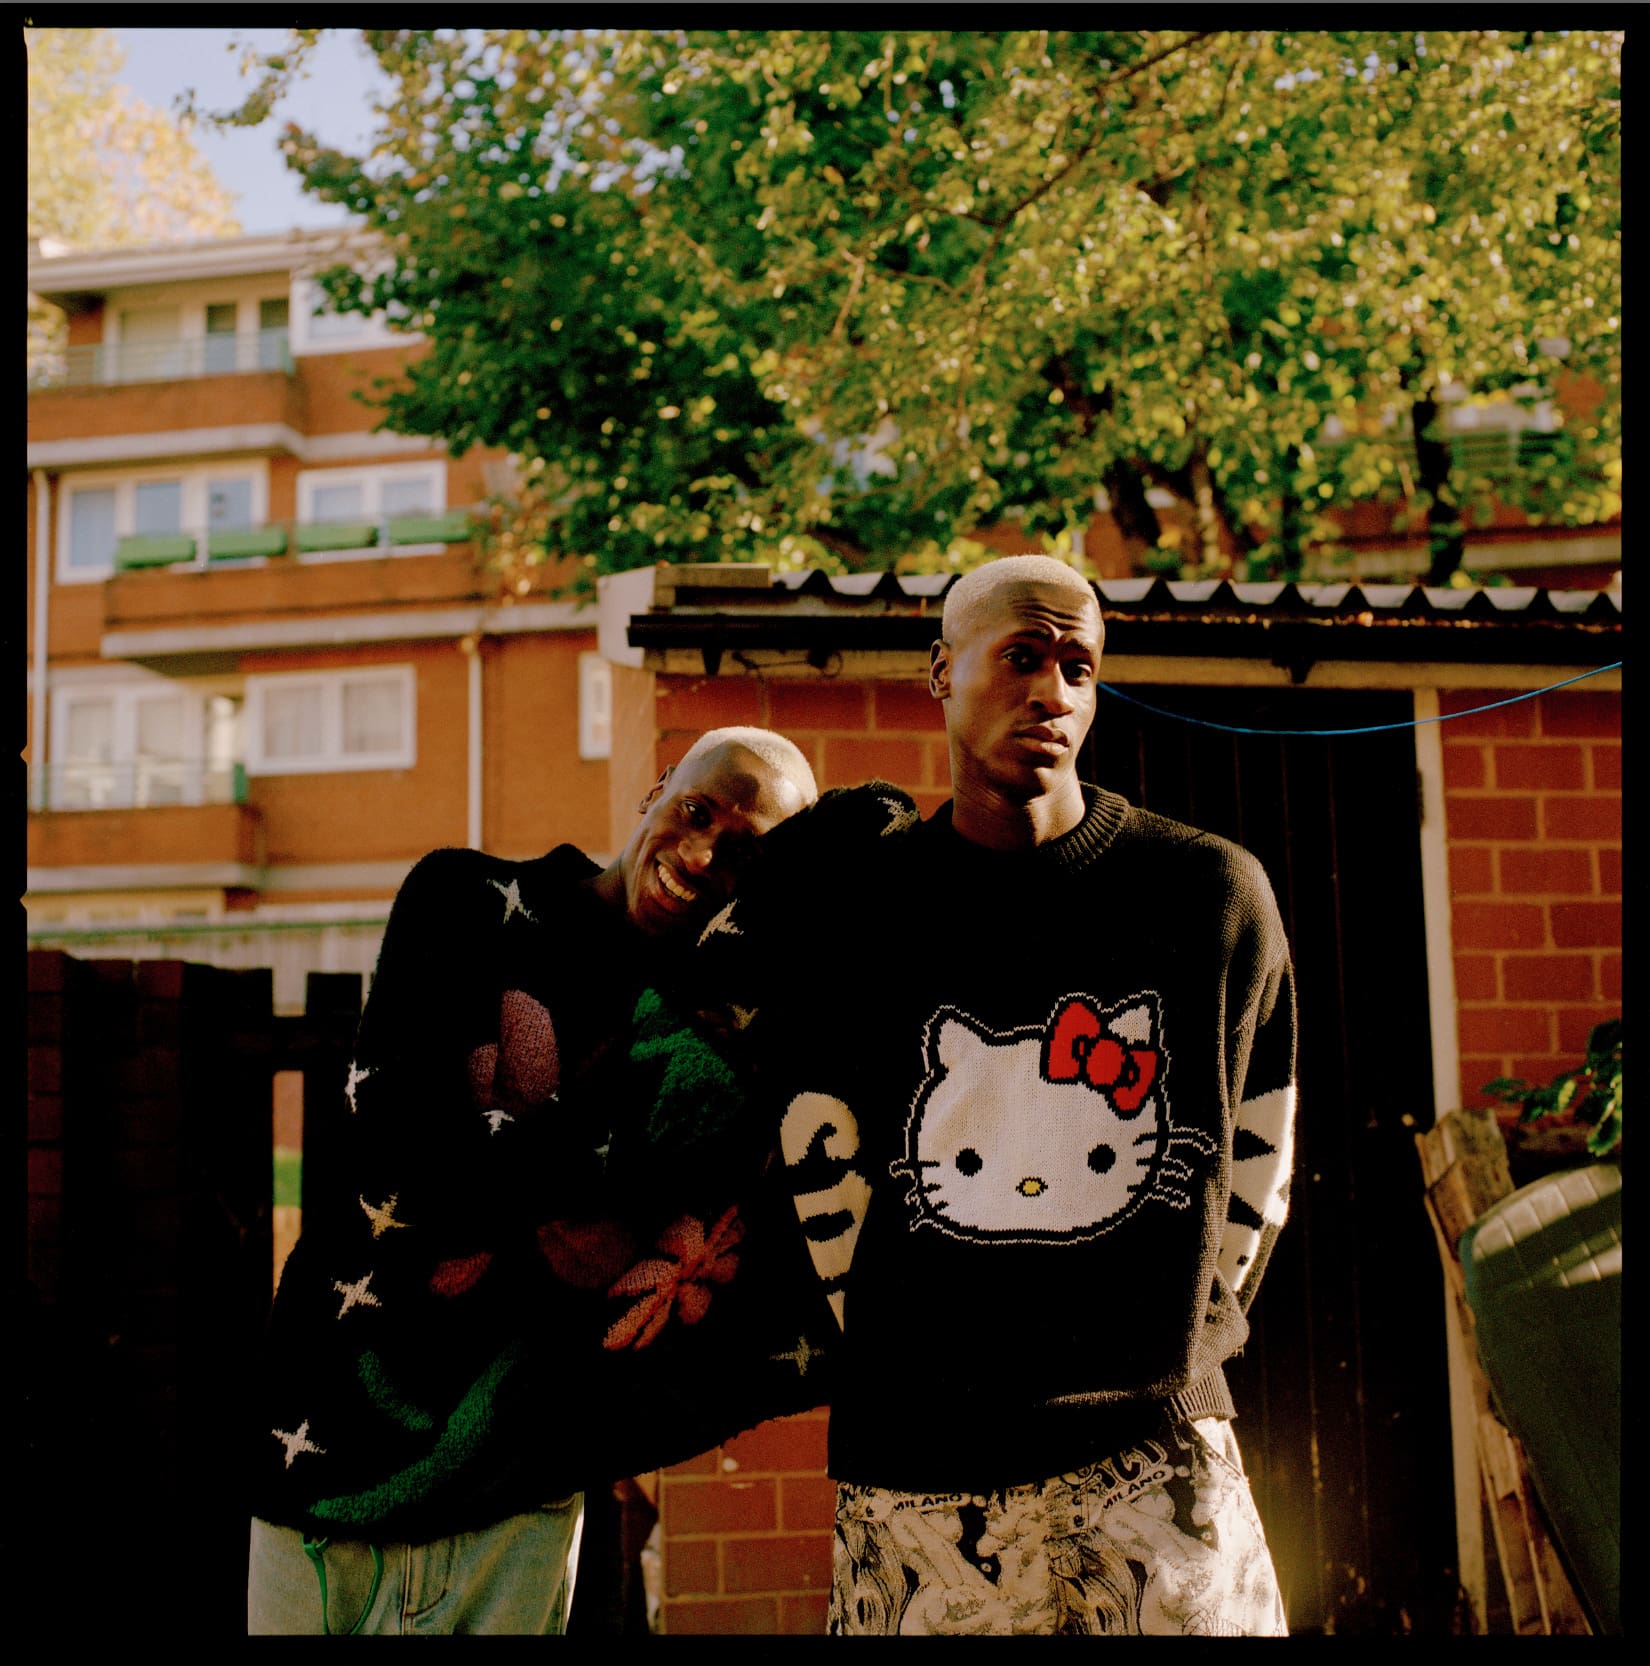 The Flag Twins | Kev and Karl Bonsu of The Flag Twins out and about in their hometown of Peckham